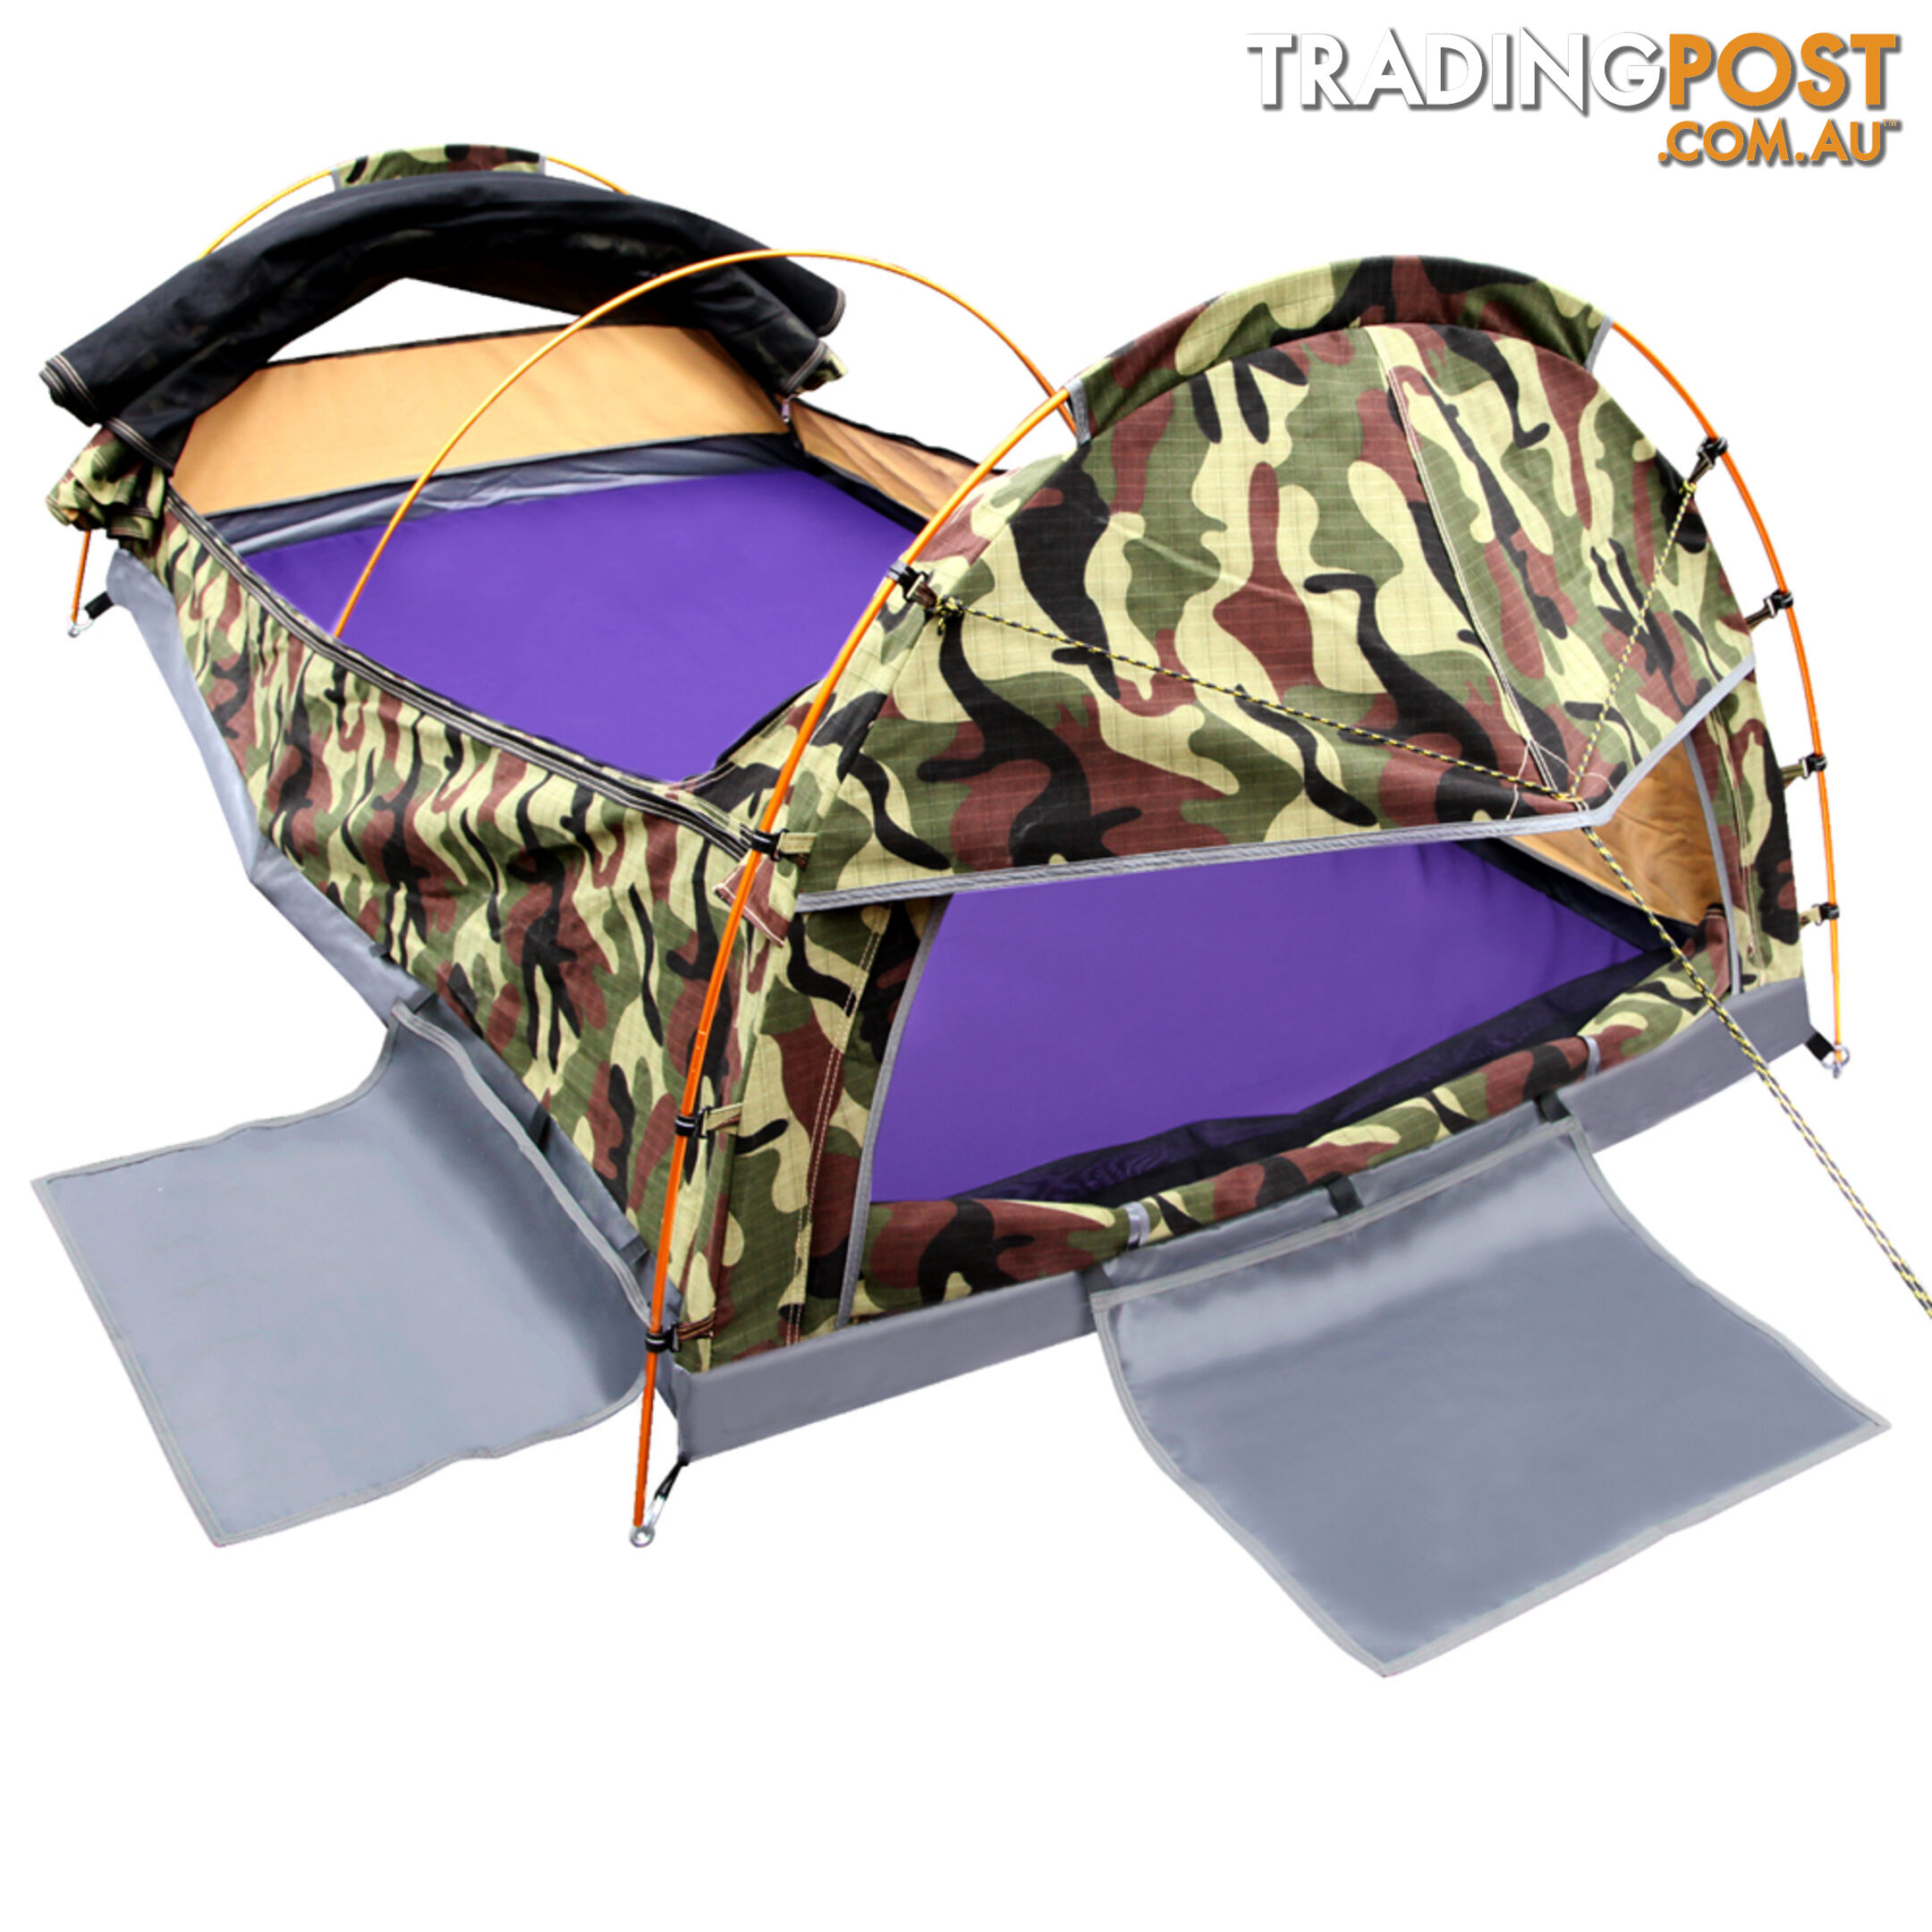 Double Camping Canvas Swag Tent Green Camouflage w/ Bag